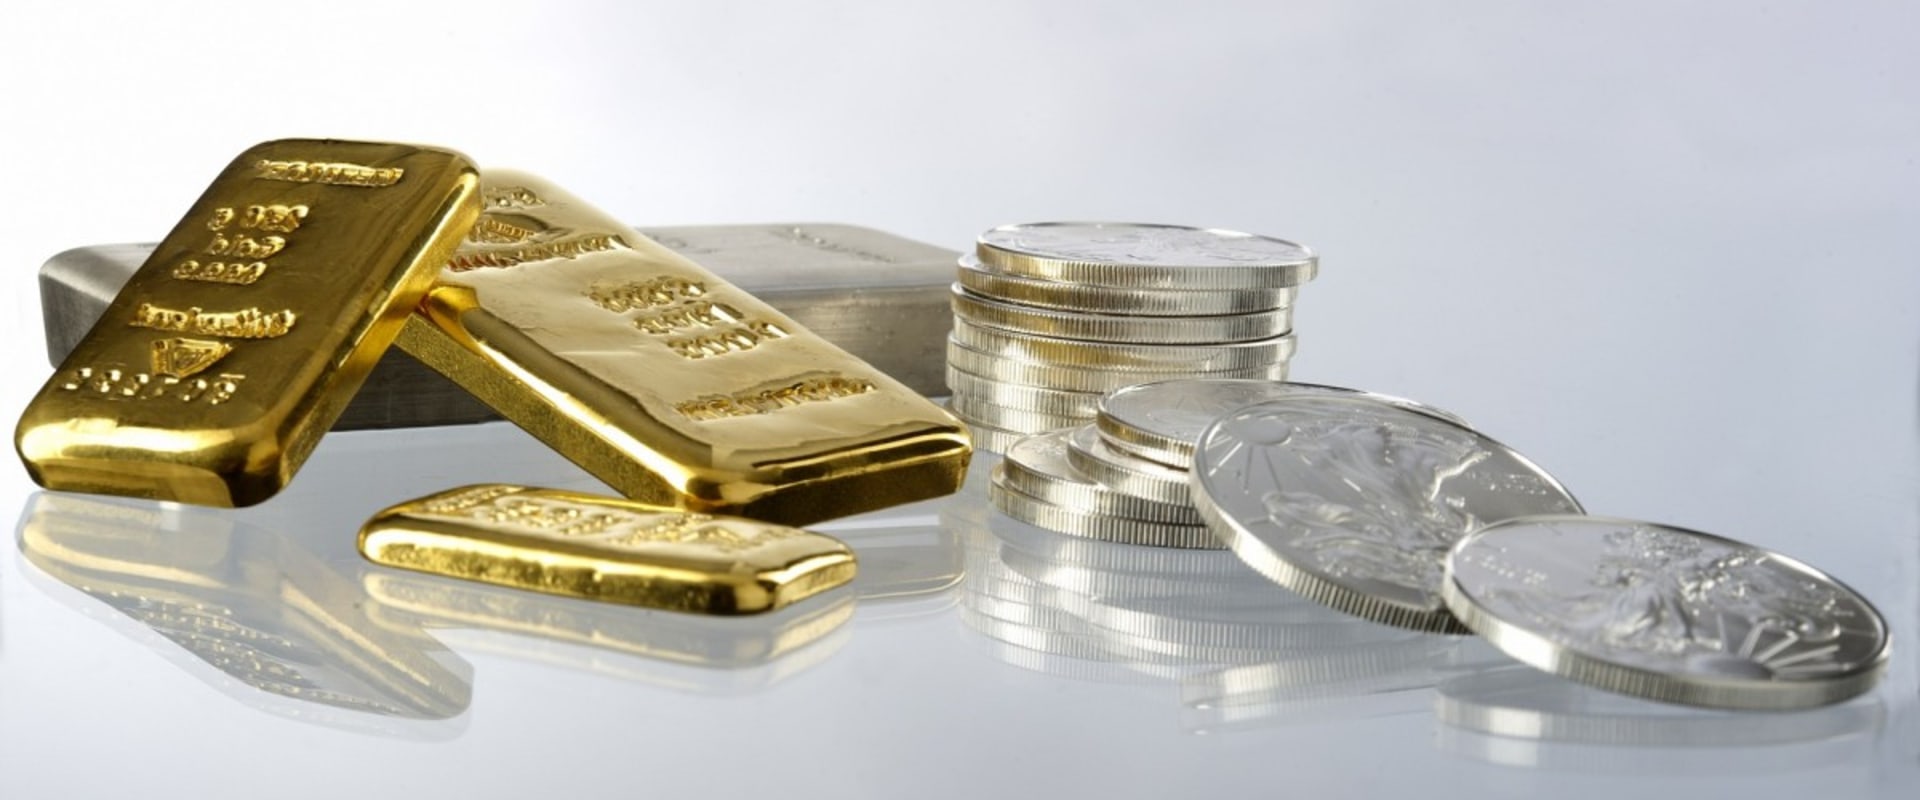 Why precious metals are down today?